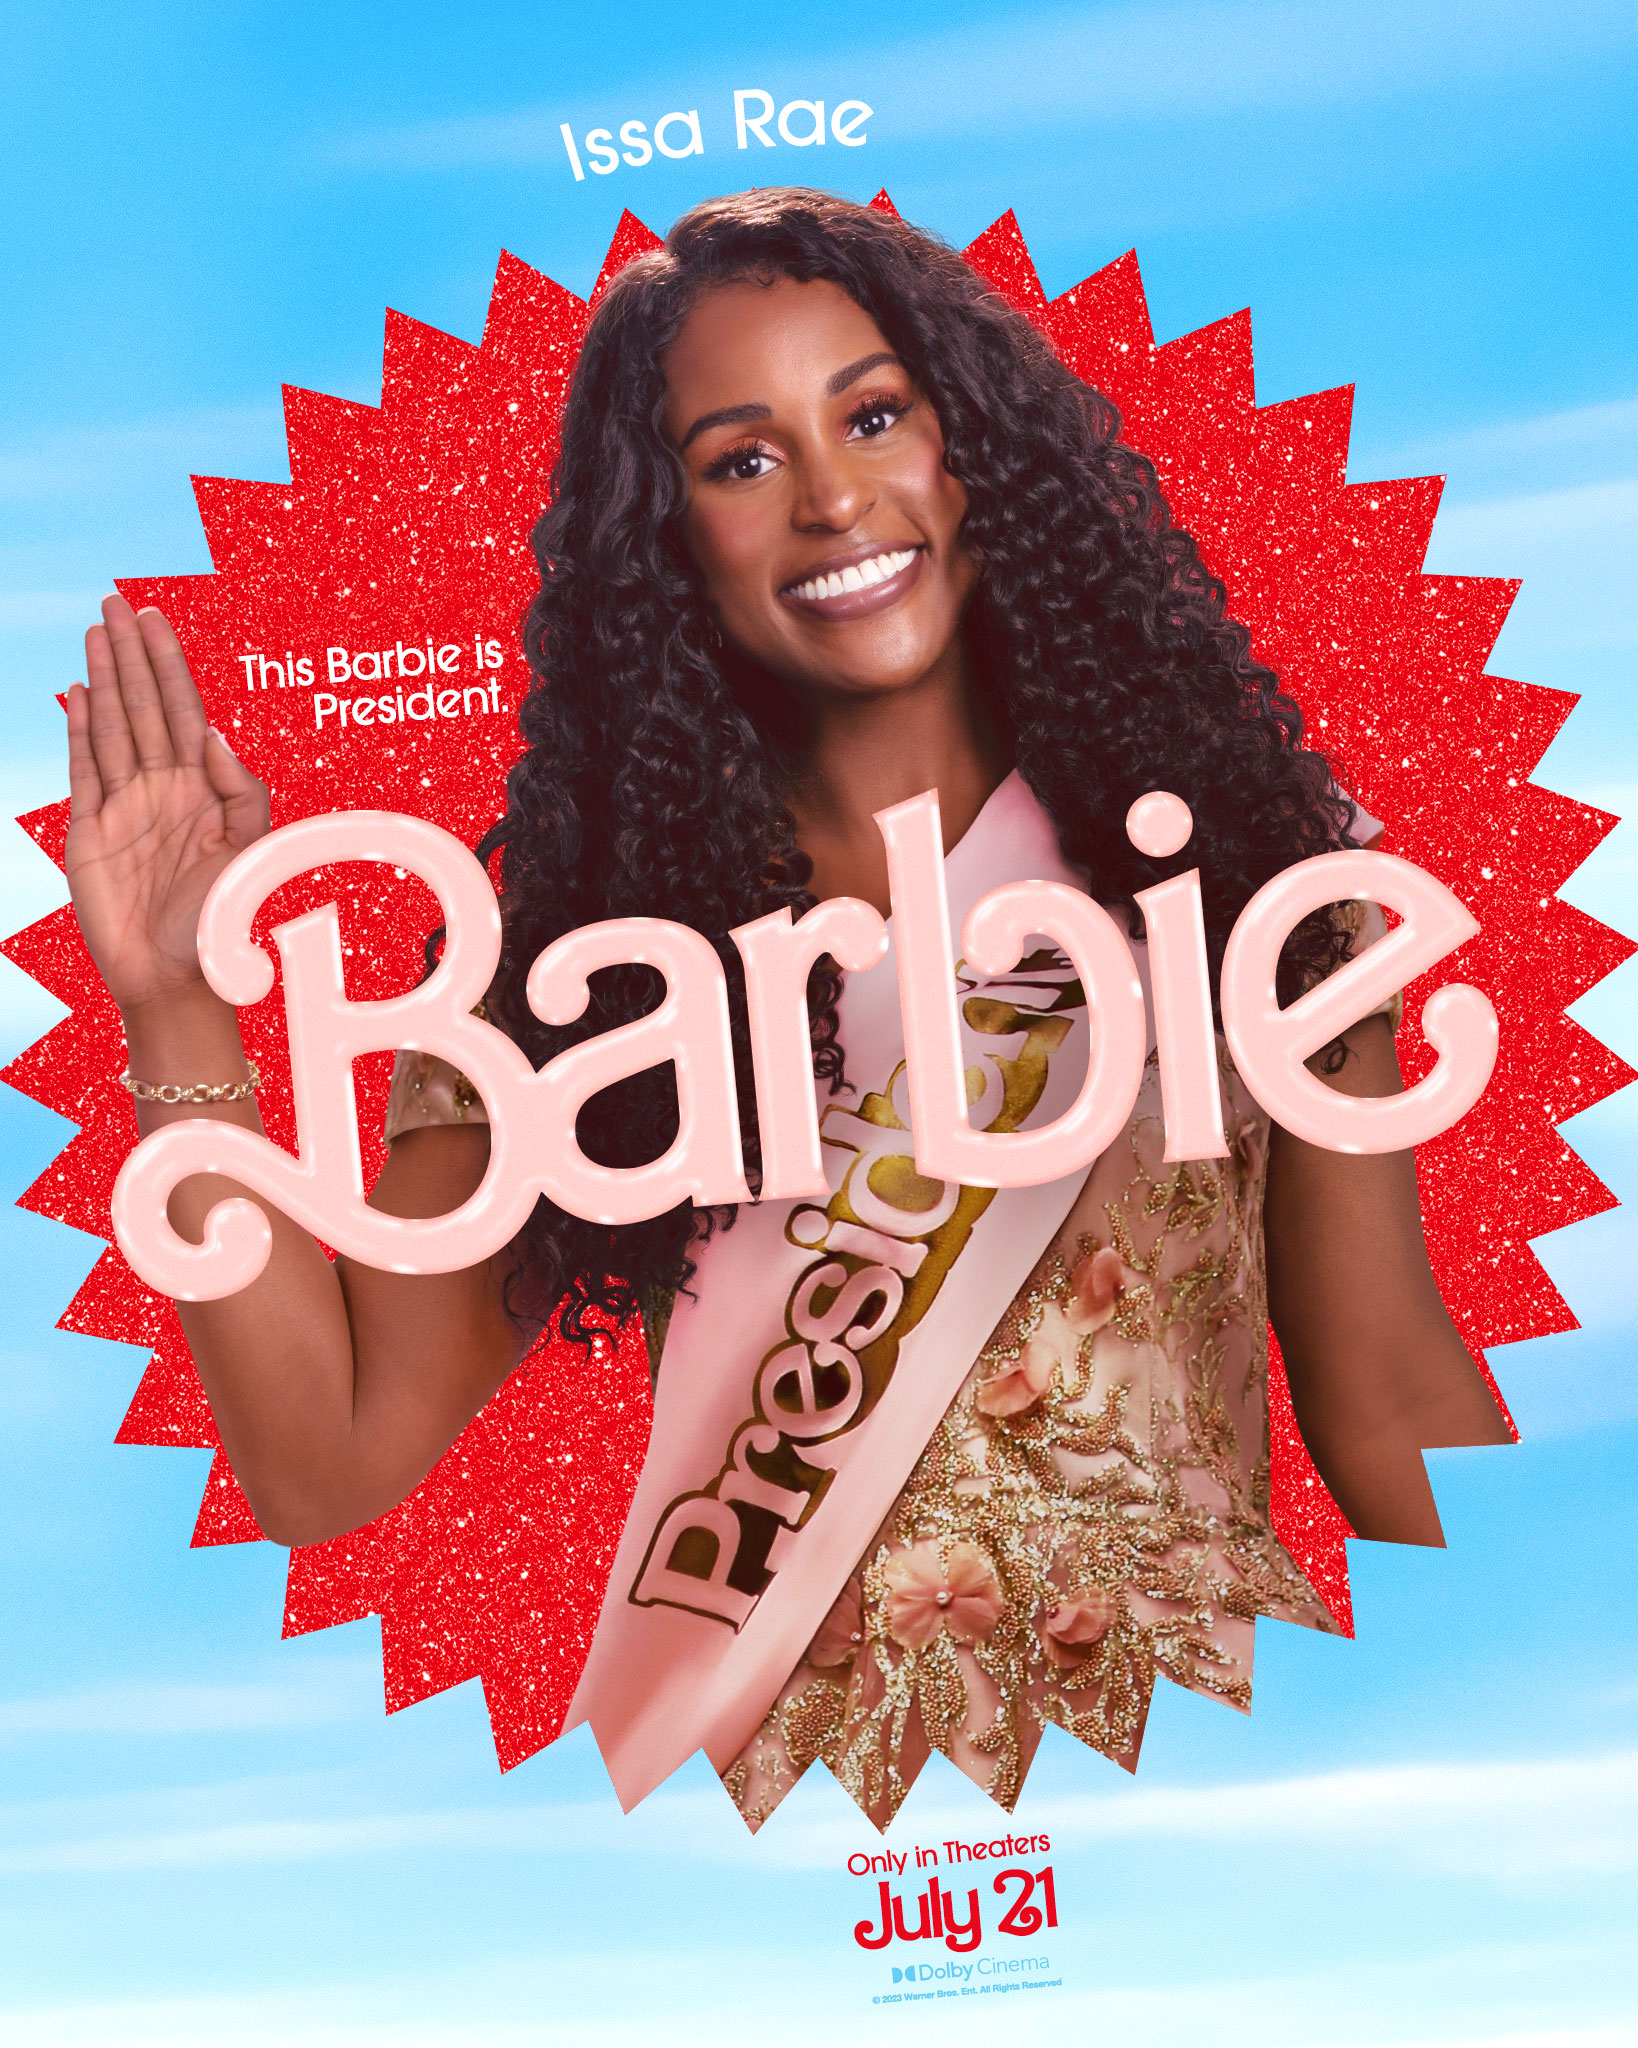 Barbie Movie Just Released A New Trailer LATF USA NEWS